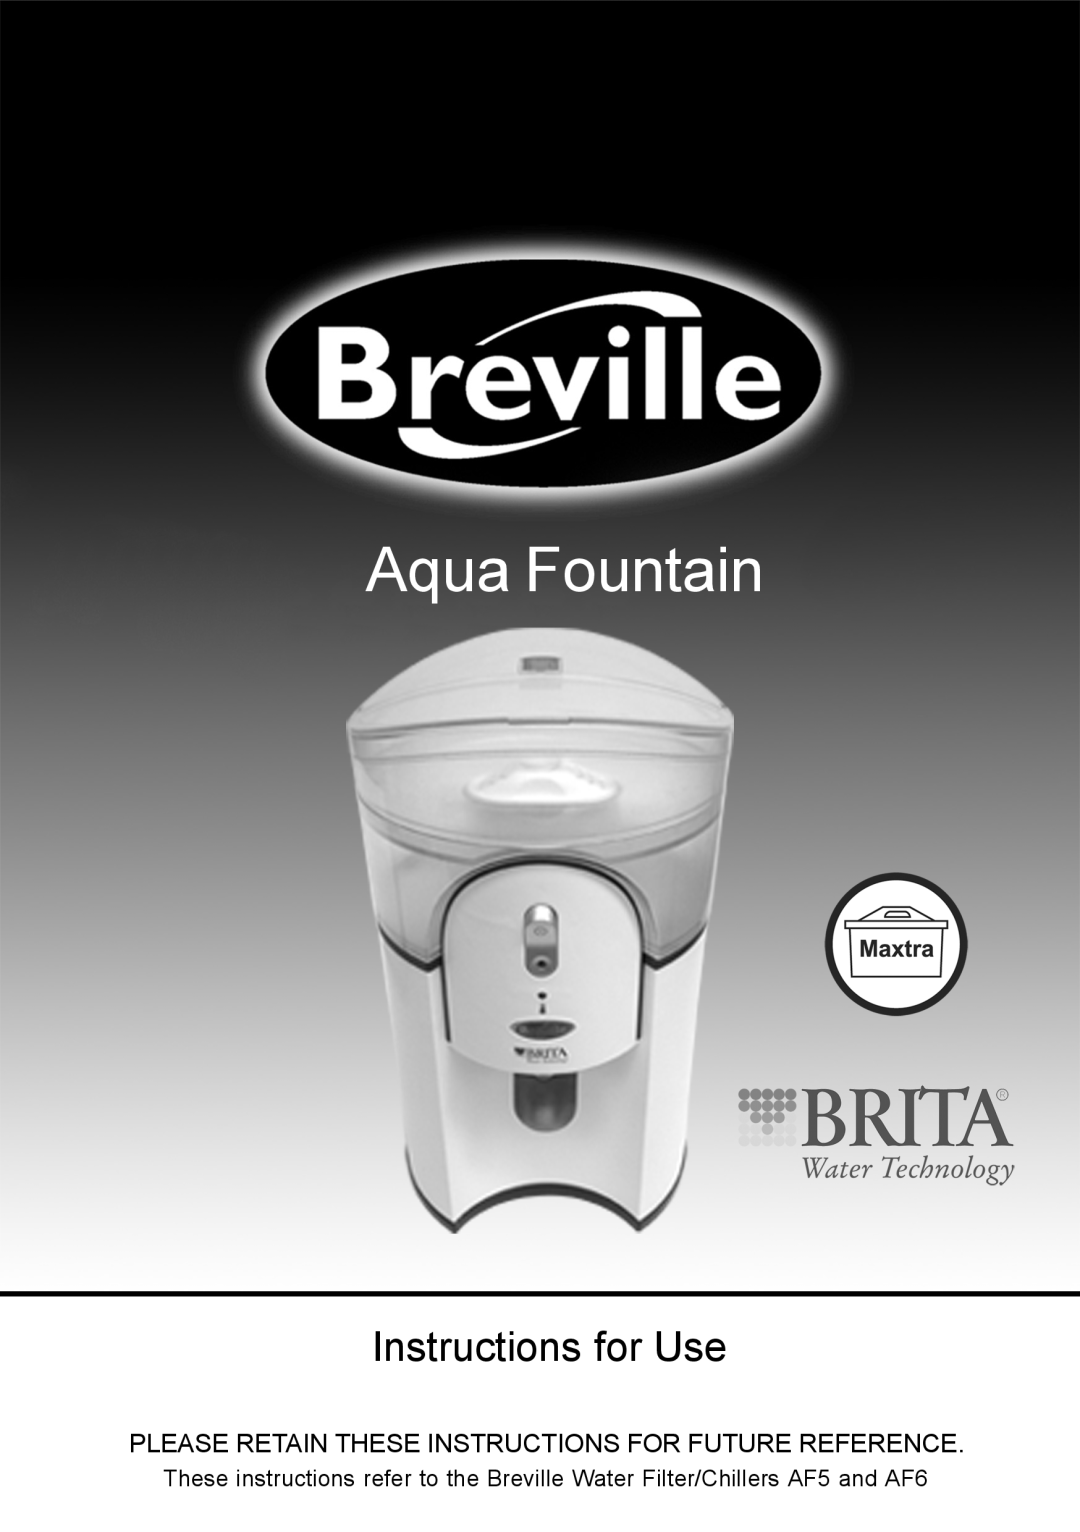 Breville AF6, AF5 manual Aqua Fountain, Instructions for Use, Please Retain These Instructions For Future Reference 